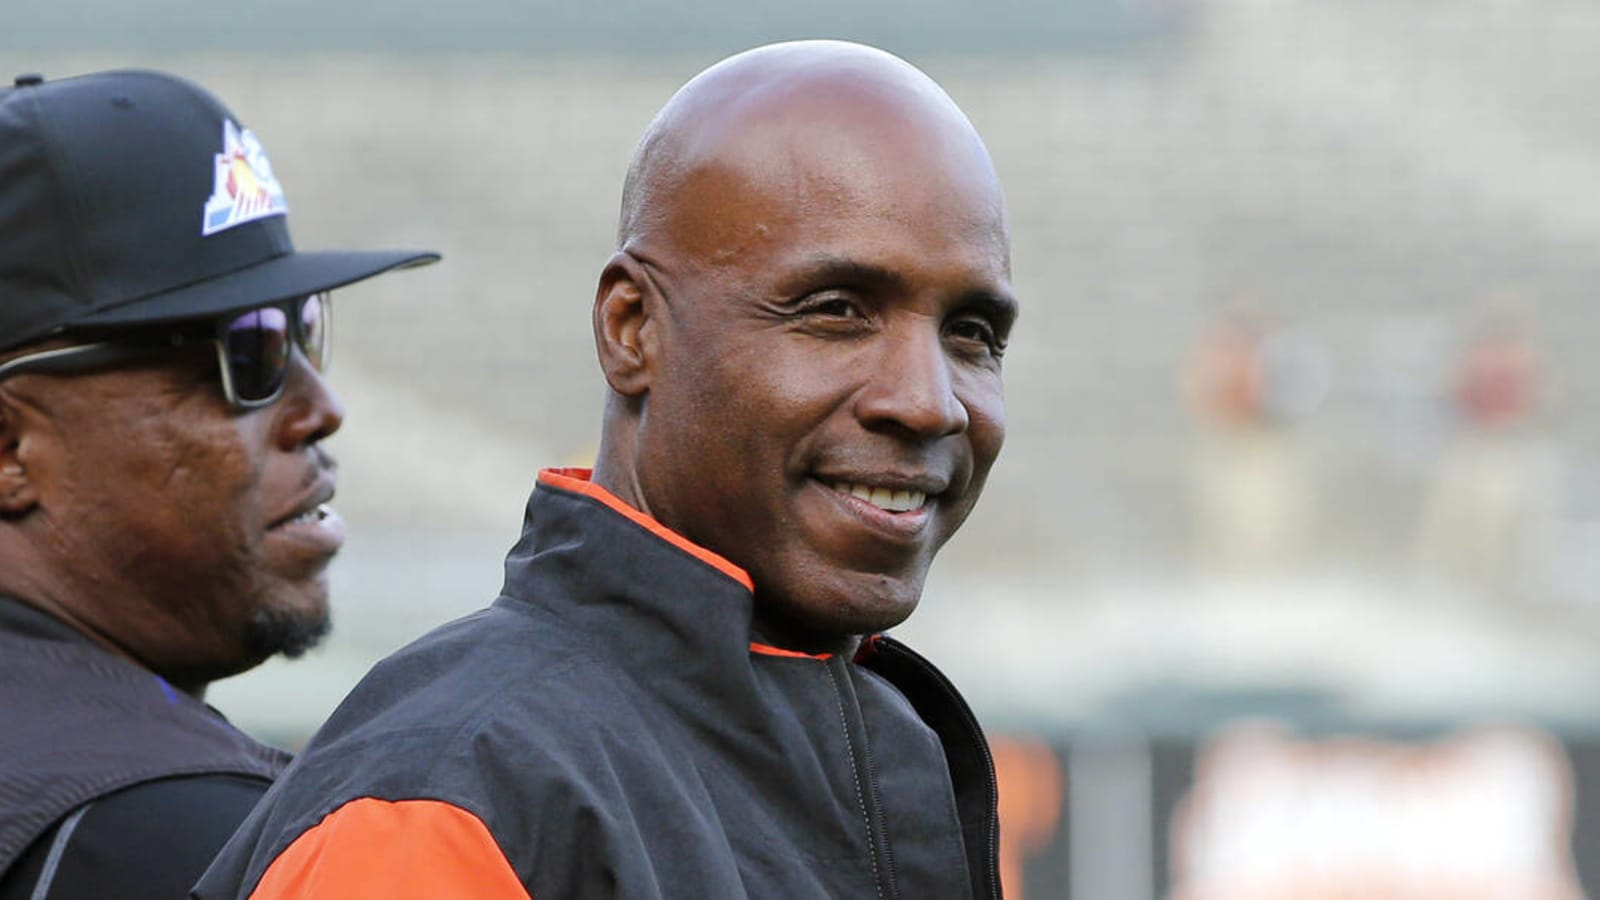 Barry Bonds opens up about being excluded from Hall of Fame